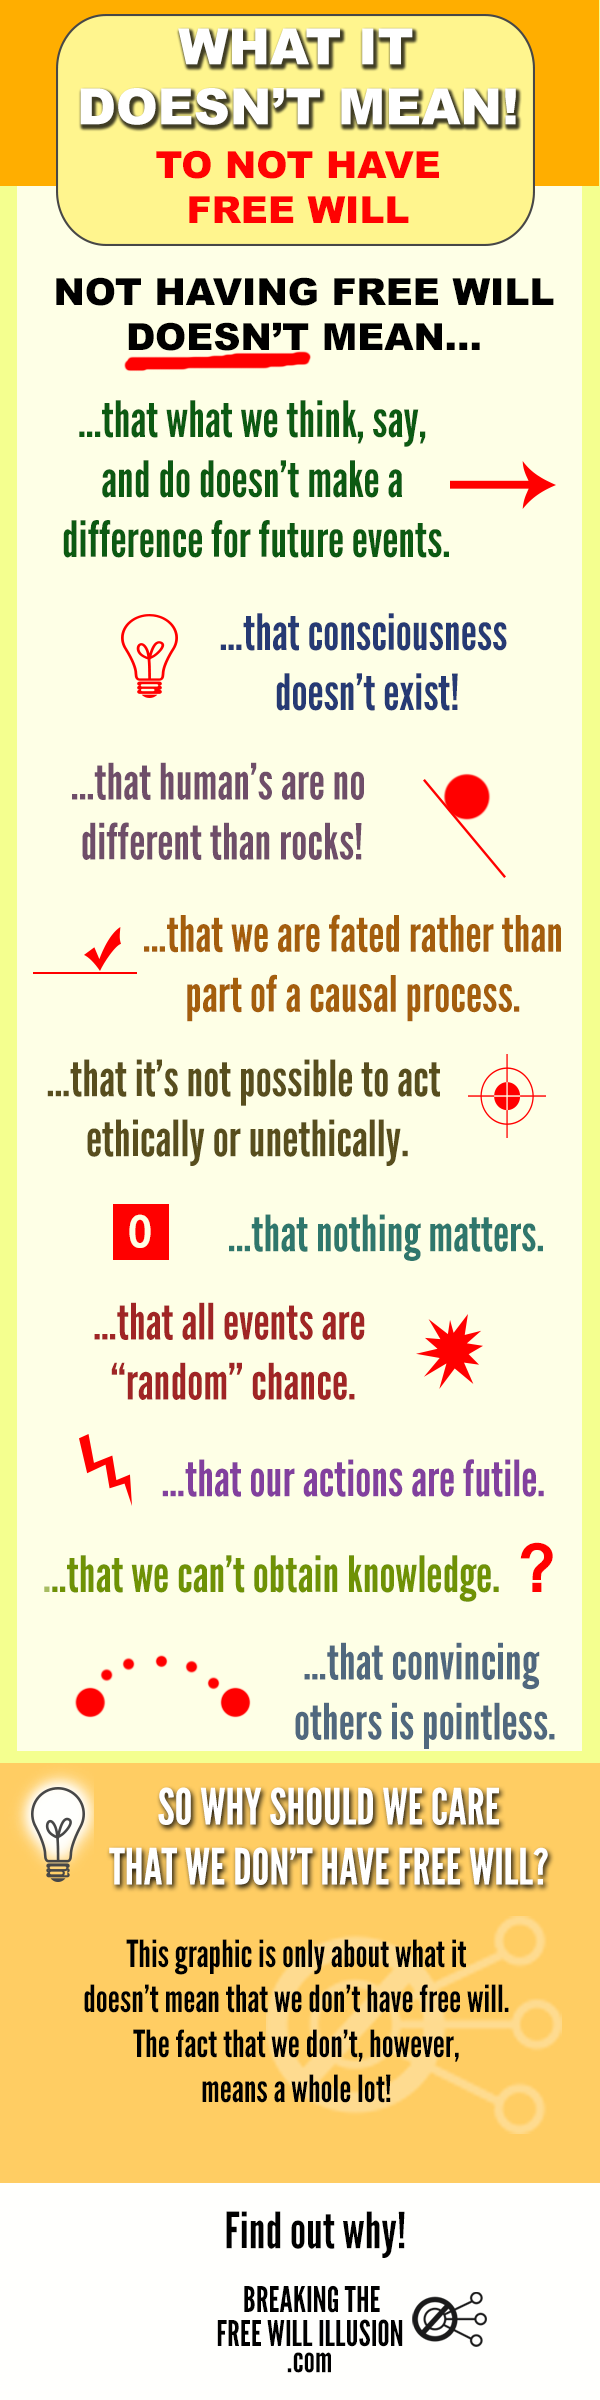 What It Doesn't Mean to NOT Have Free Will - INFOGRAPHIC